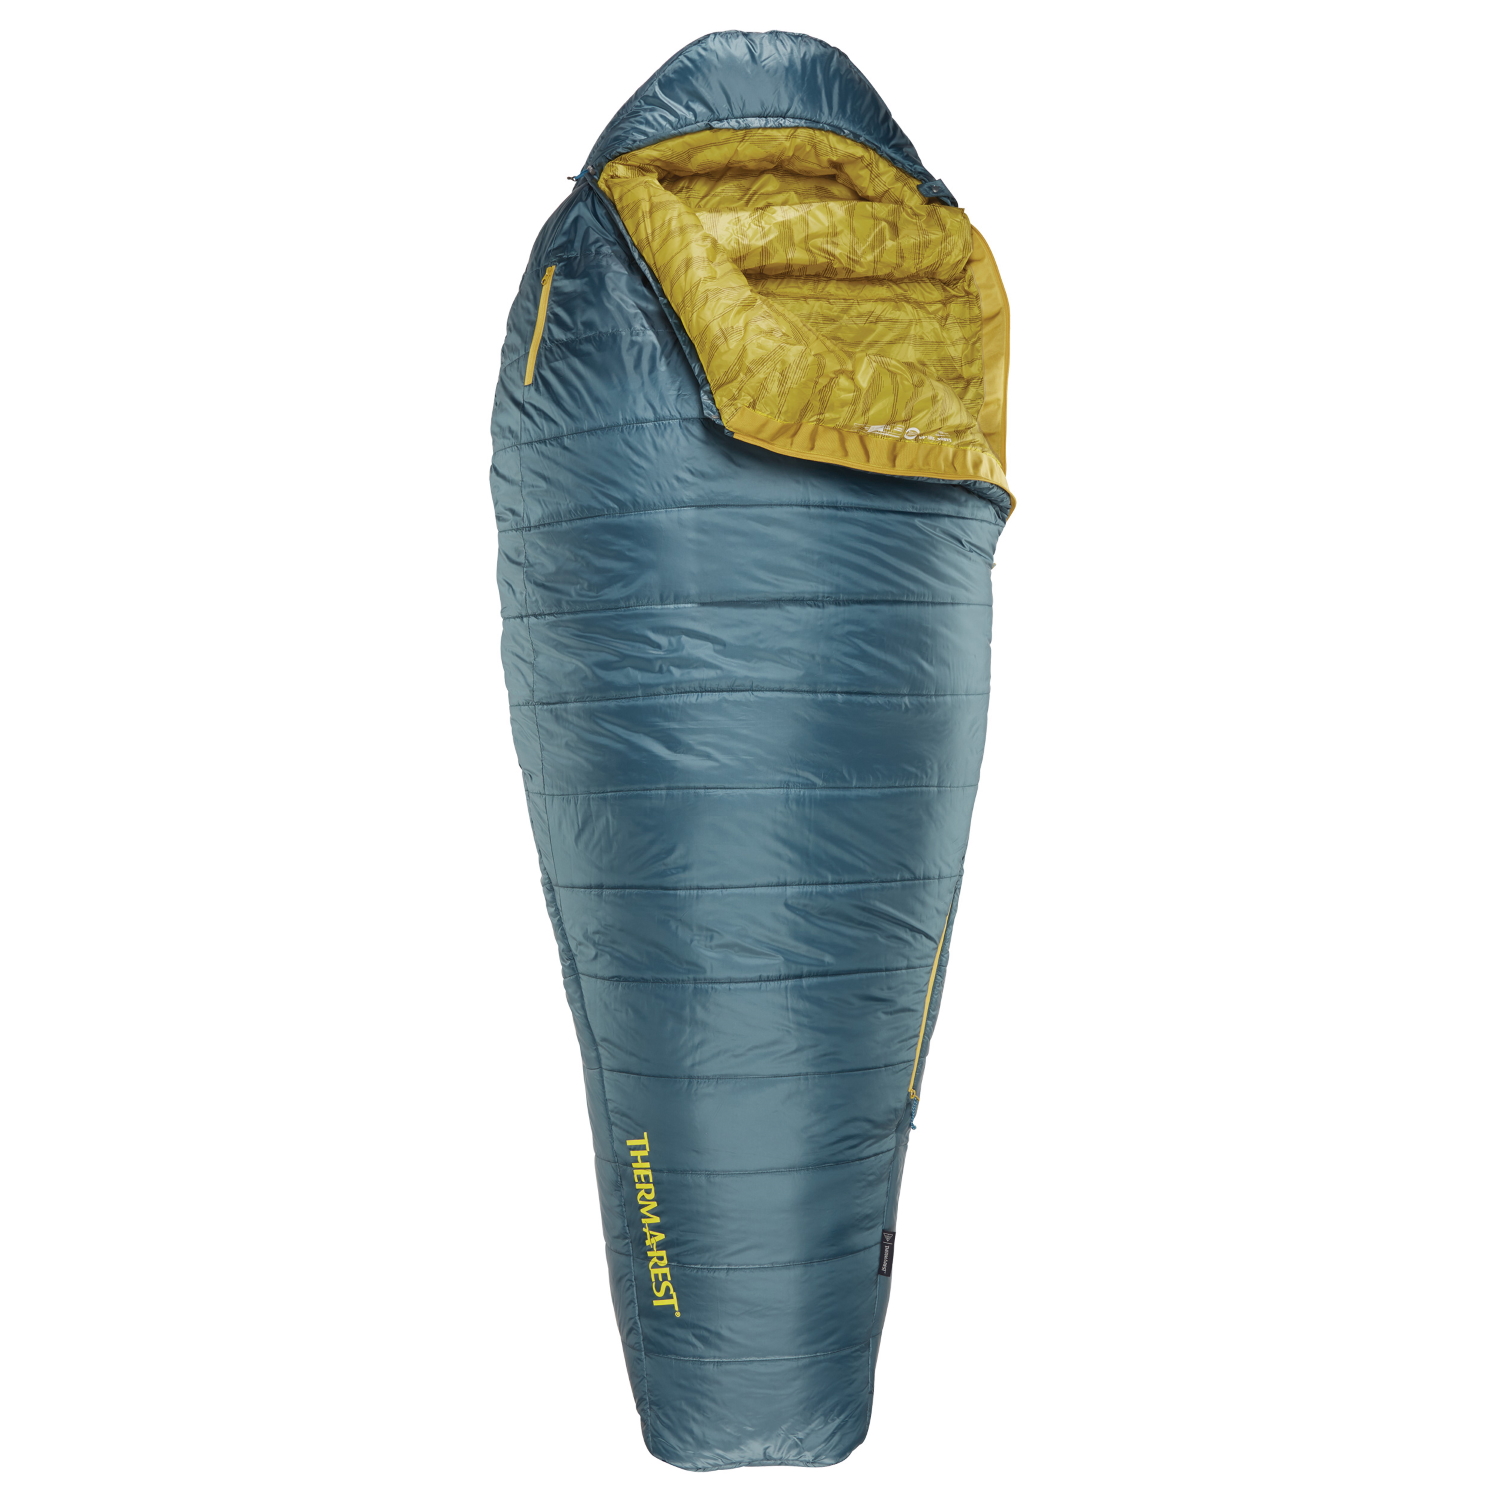 Picture of Therm-a-Rest Saros 20F/-6C R Sleeping Bag - Stargazer